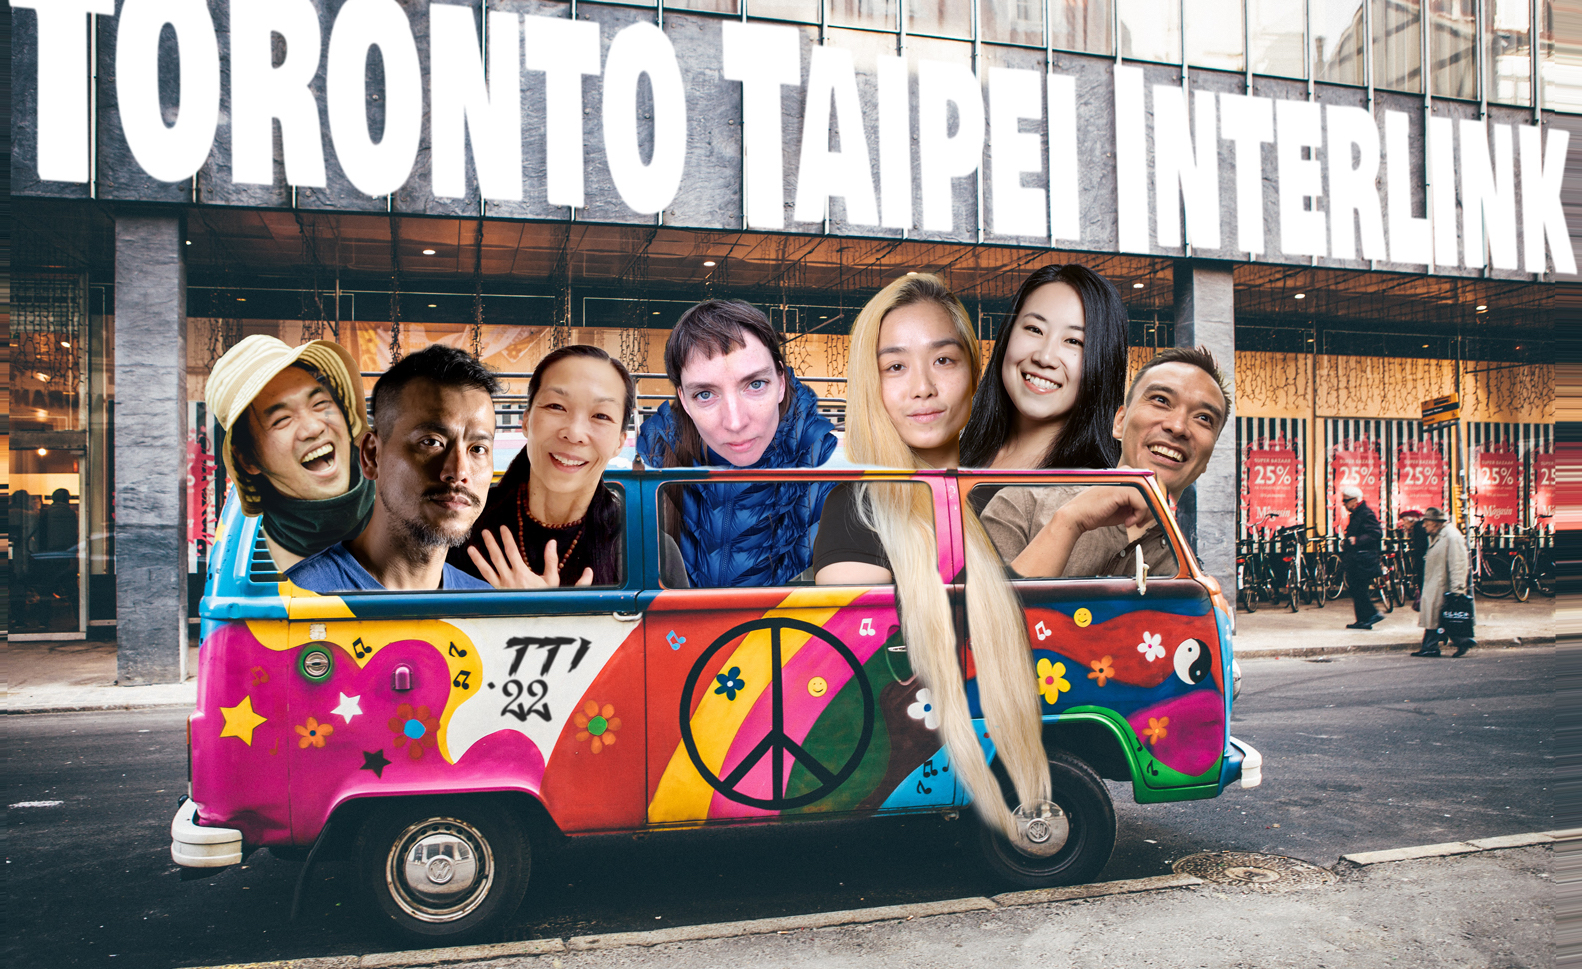 Seven artists ride in a colourful van with peace signs, rainbows and stars. The words 'Toronto Taipei Interlink' appear on the building behind them.